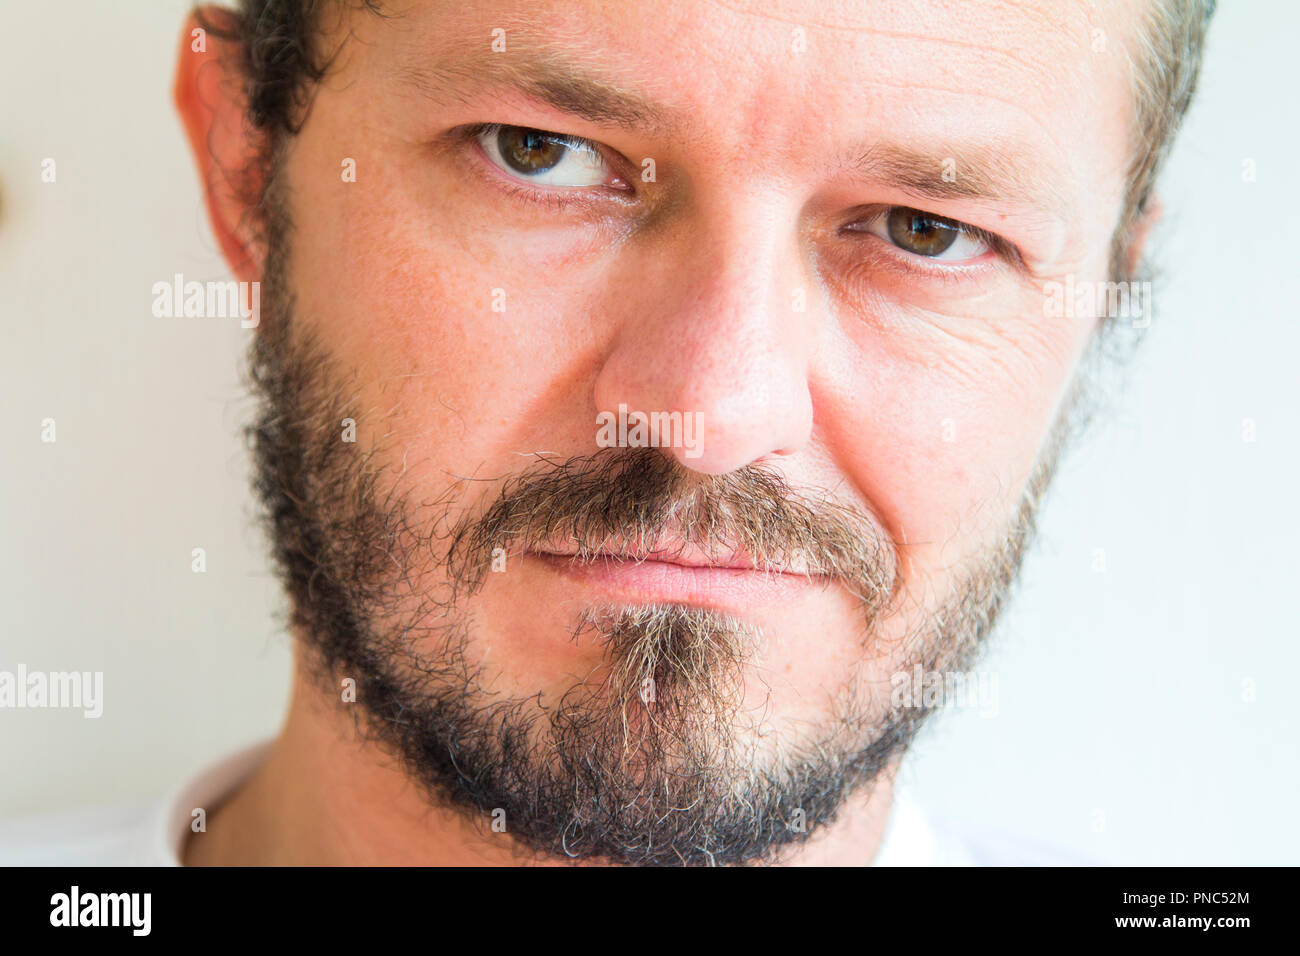 Man with beard and mustaches, skeptic and mean expression Stock Photo